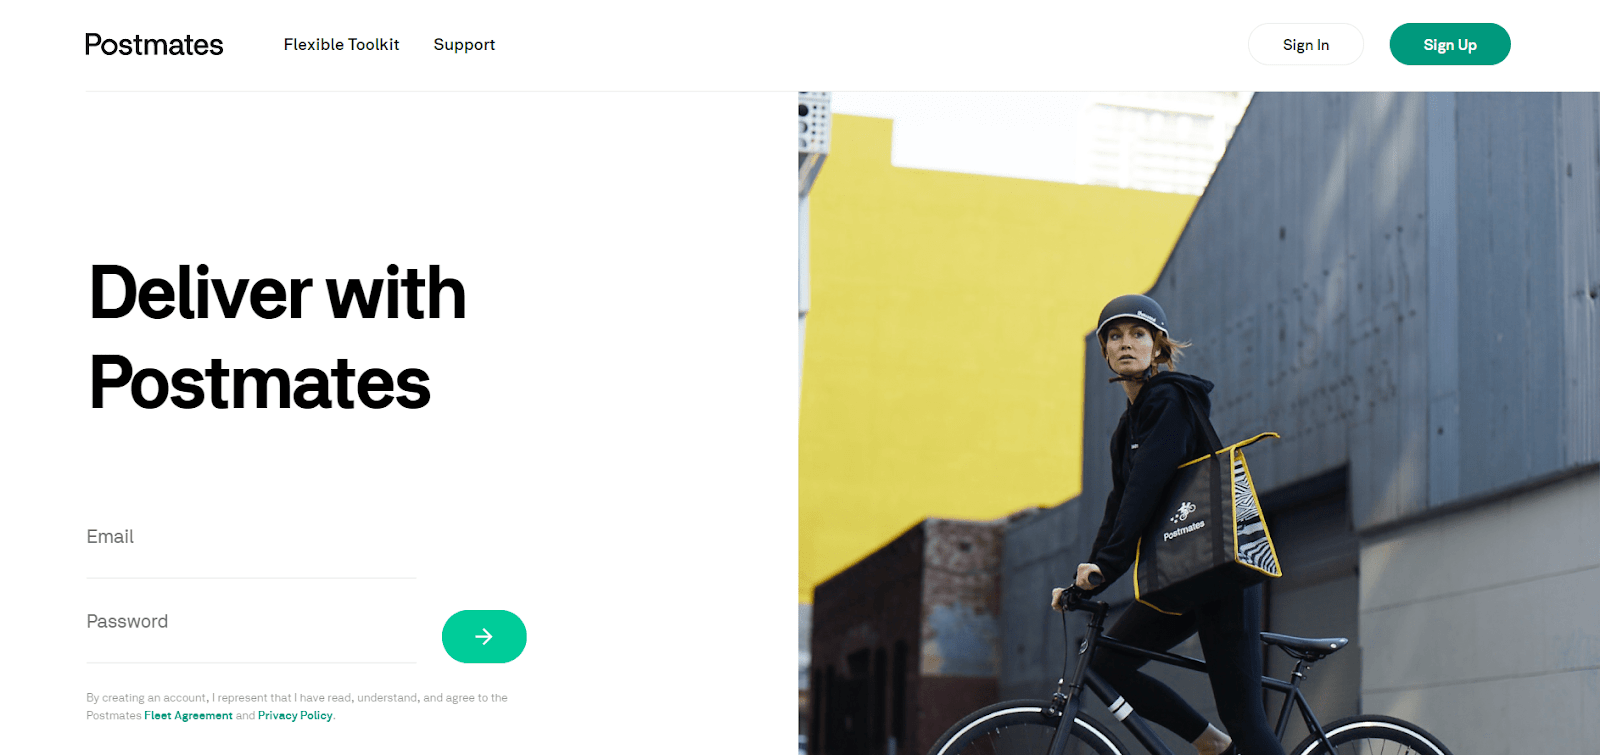 Postmates requirements: the "Deliver with Postmates" webpage